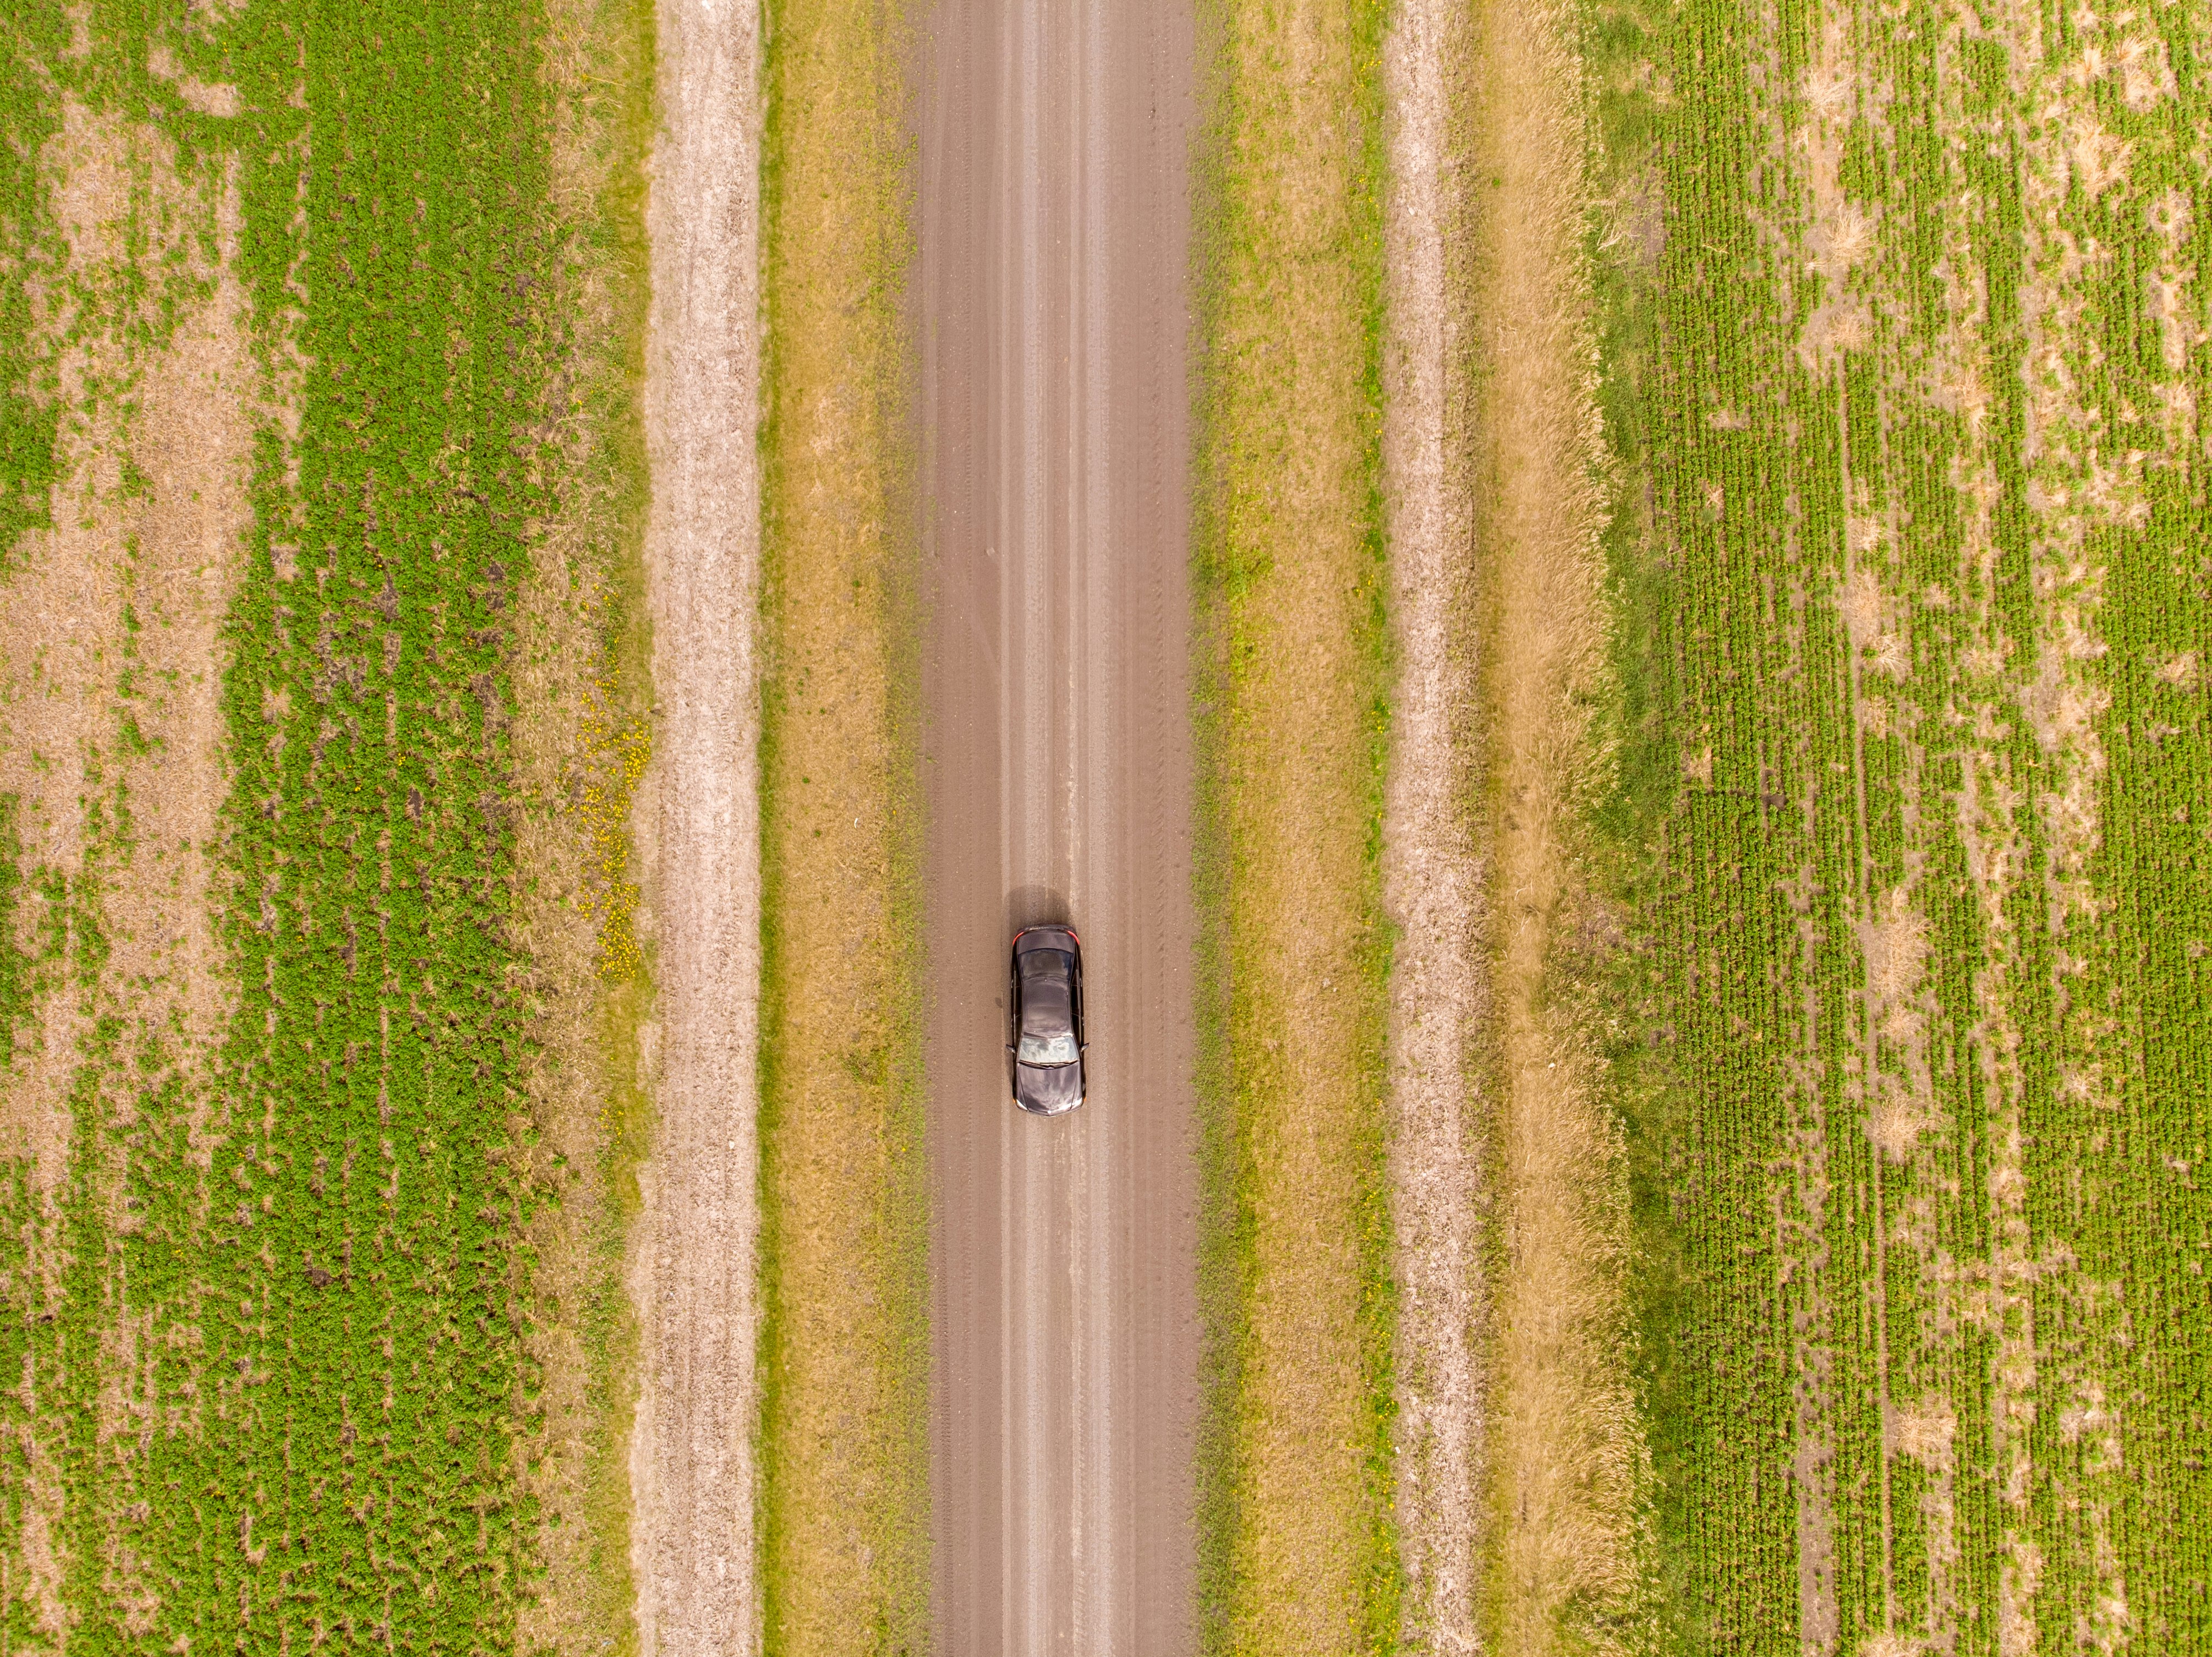 Car on a dirt road with farmers fields